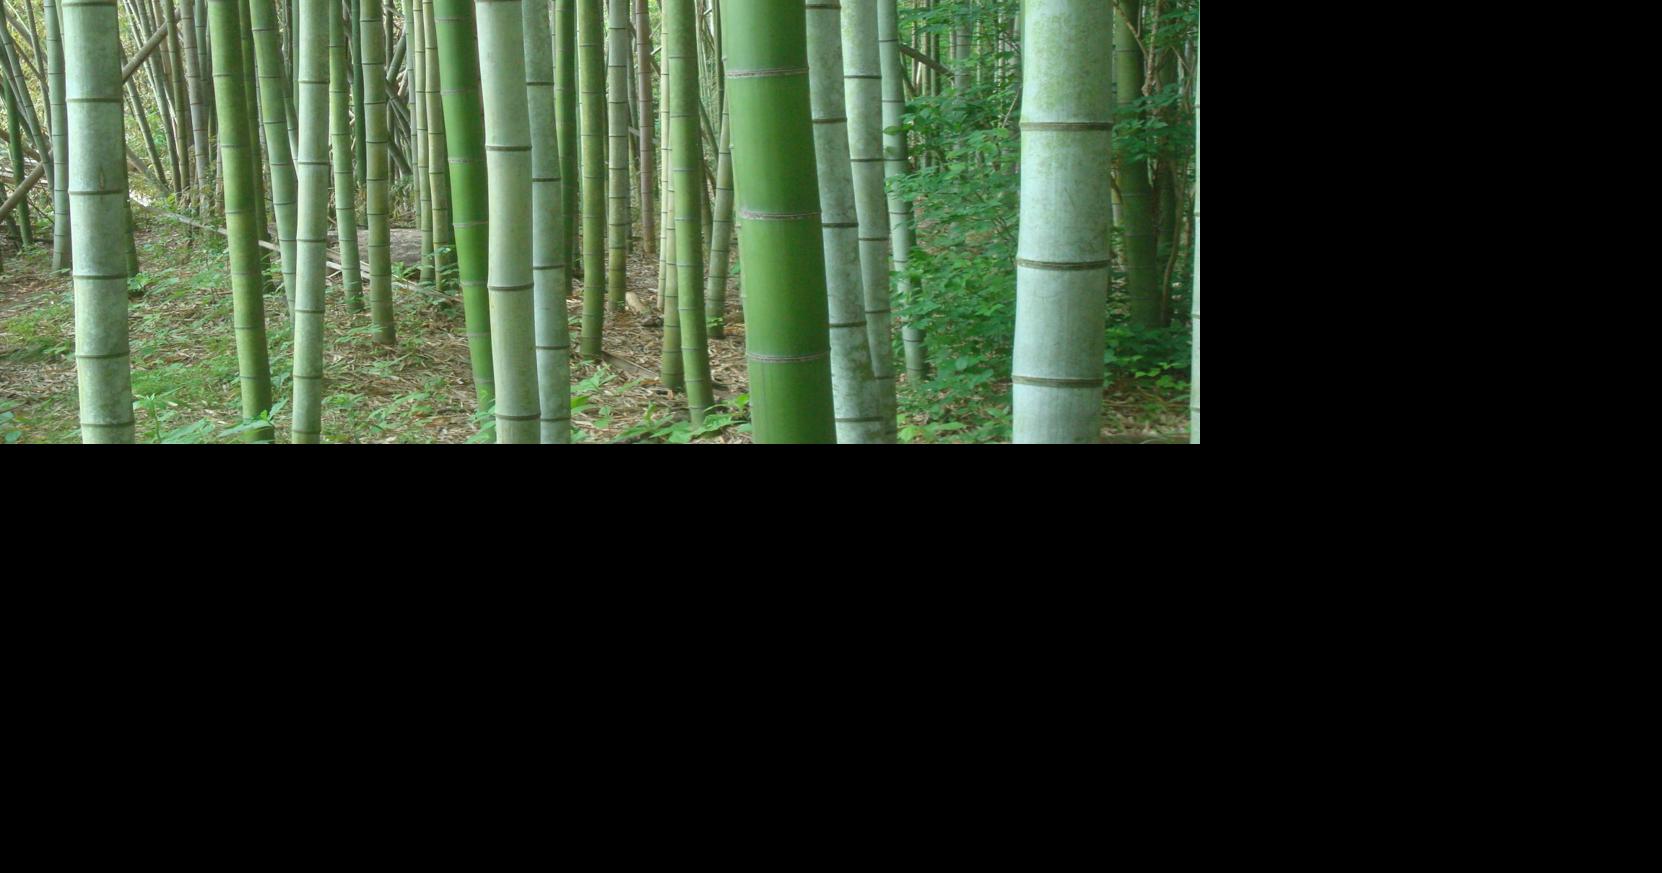 A Forest of Bamboo